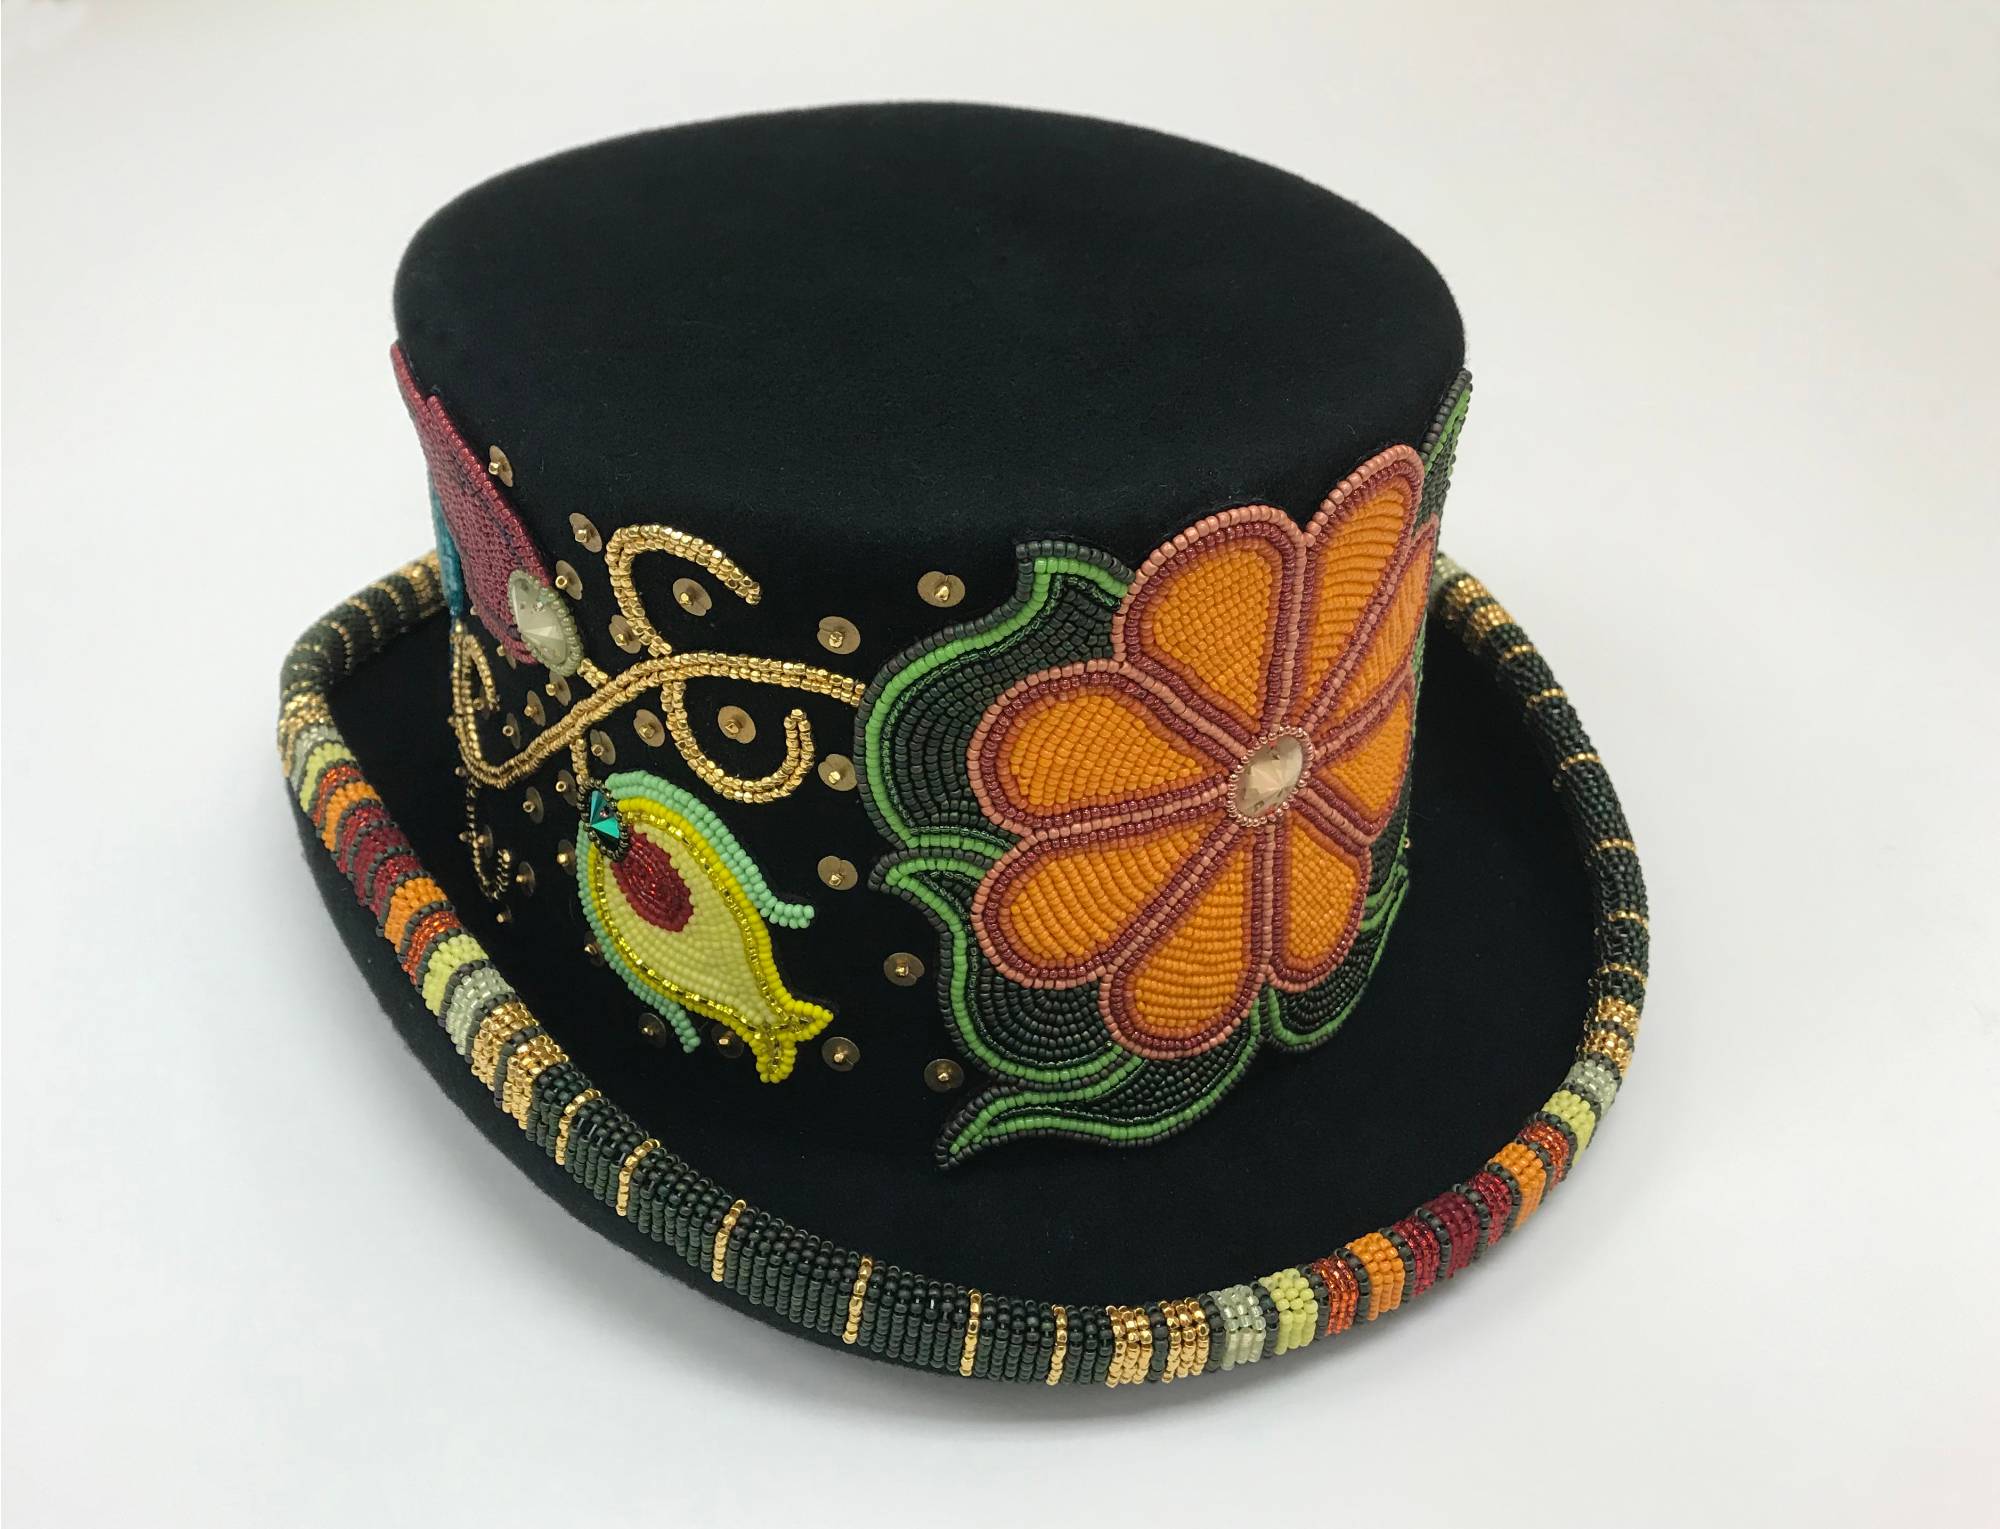 Black top hat decorated with colorful, intricate floral beadwork